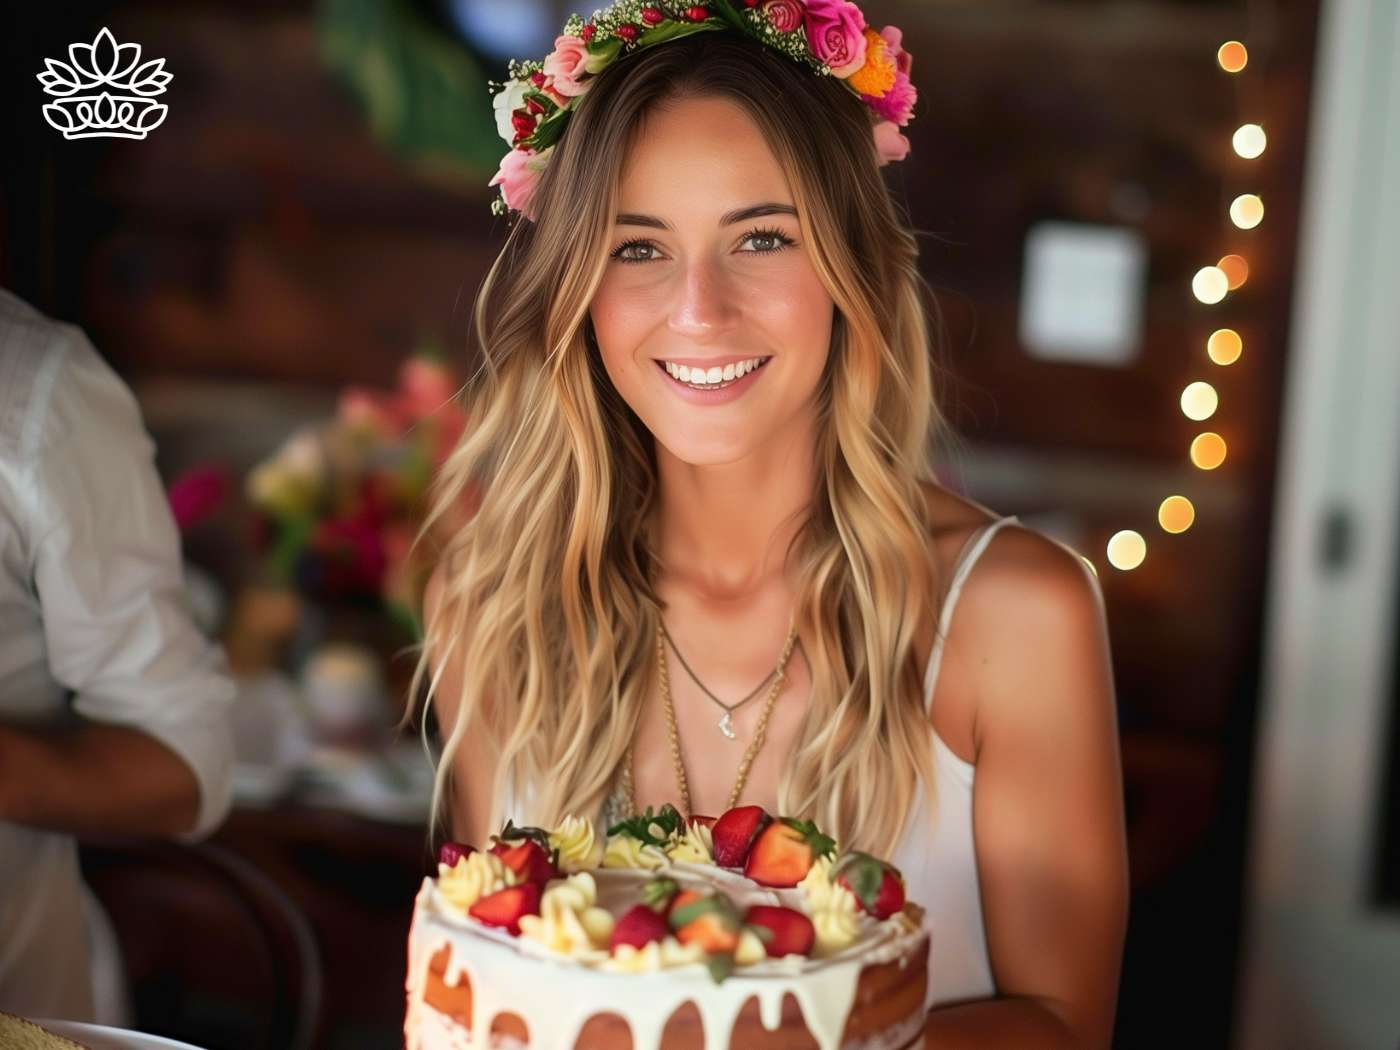 Joyful woman adorned with a floral headpiece, presenting a beautifully decorated cake, encapsulating the bespoke charm of Fabulous Flowers and Gifts.